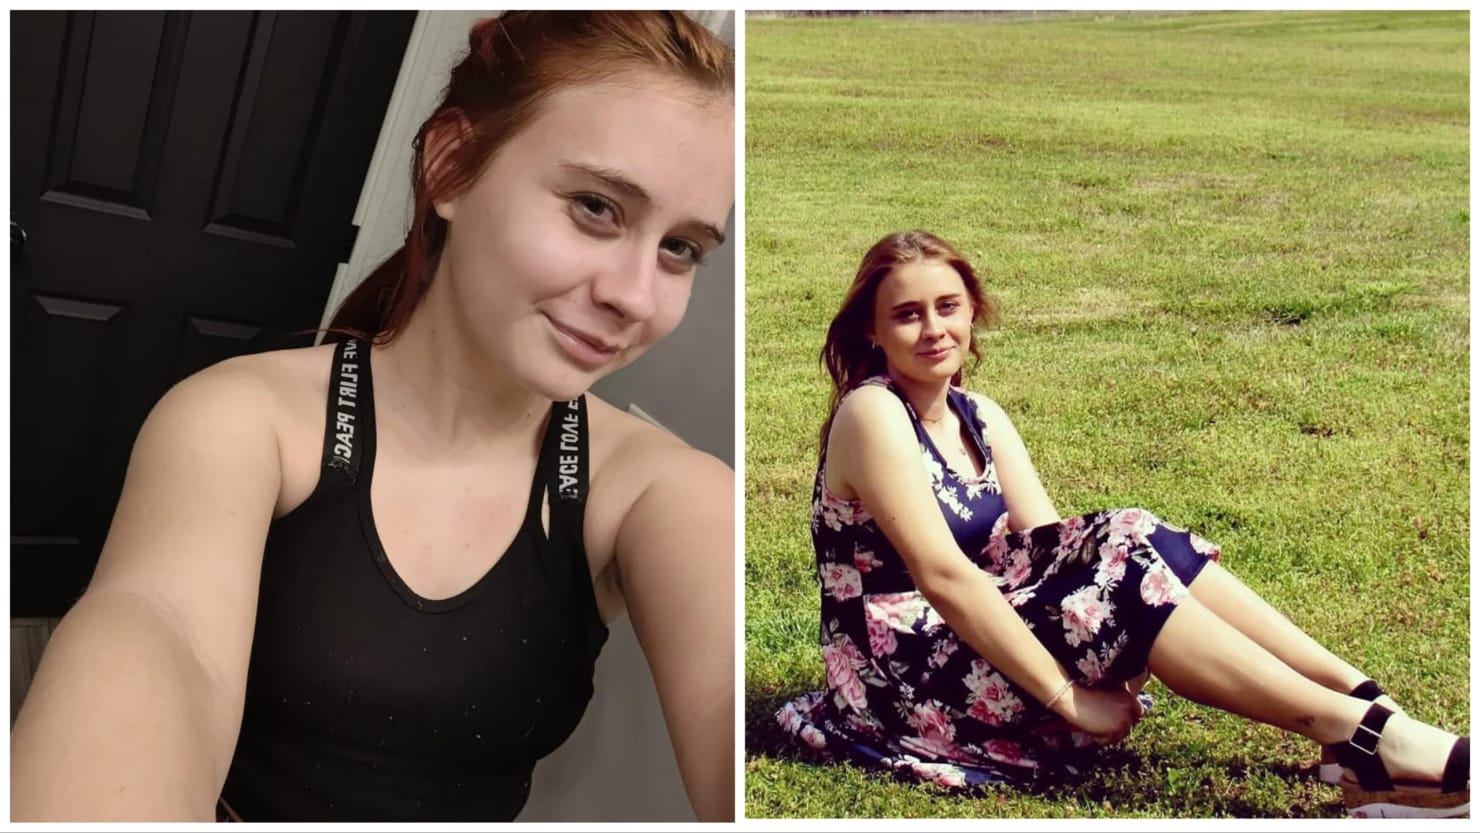 Xxx Video Fast Time 14 Yers - Search for Missing Okmulgee Teens Ivy Webster, Brittany Brewer Ends in  Discovery of 7 Bodies